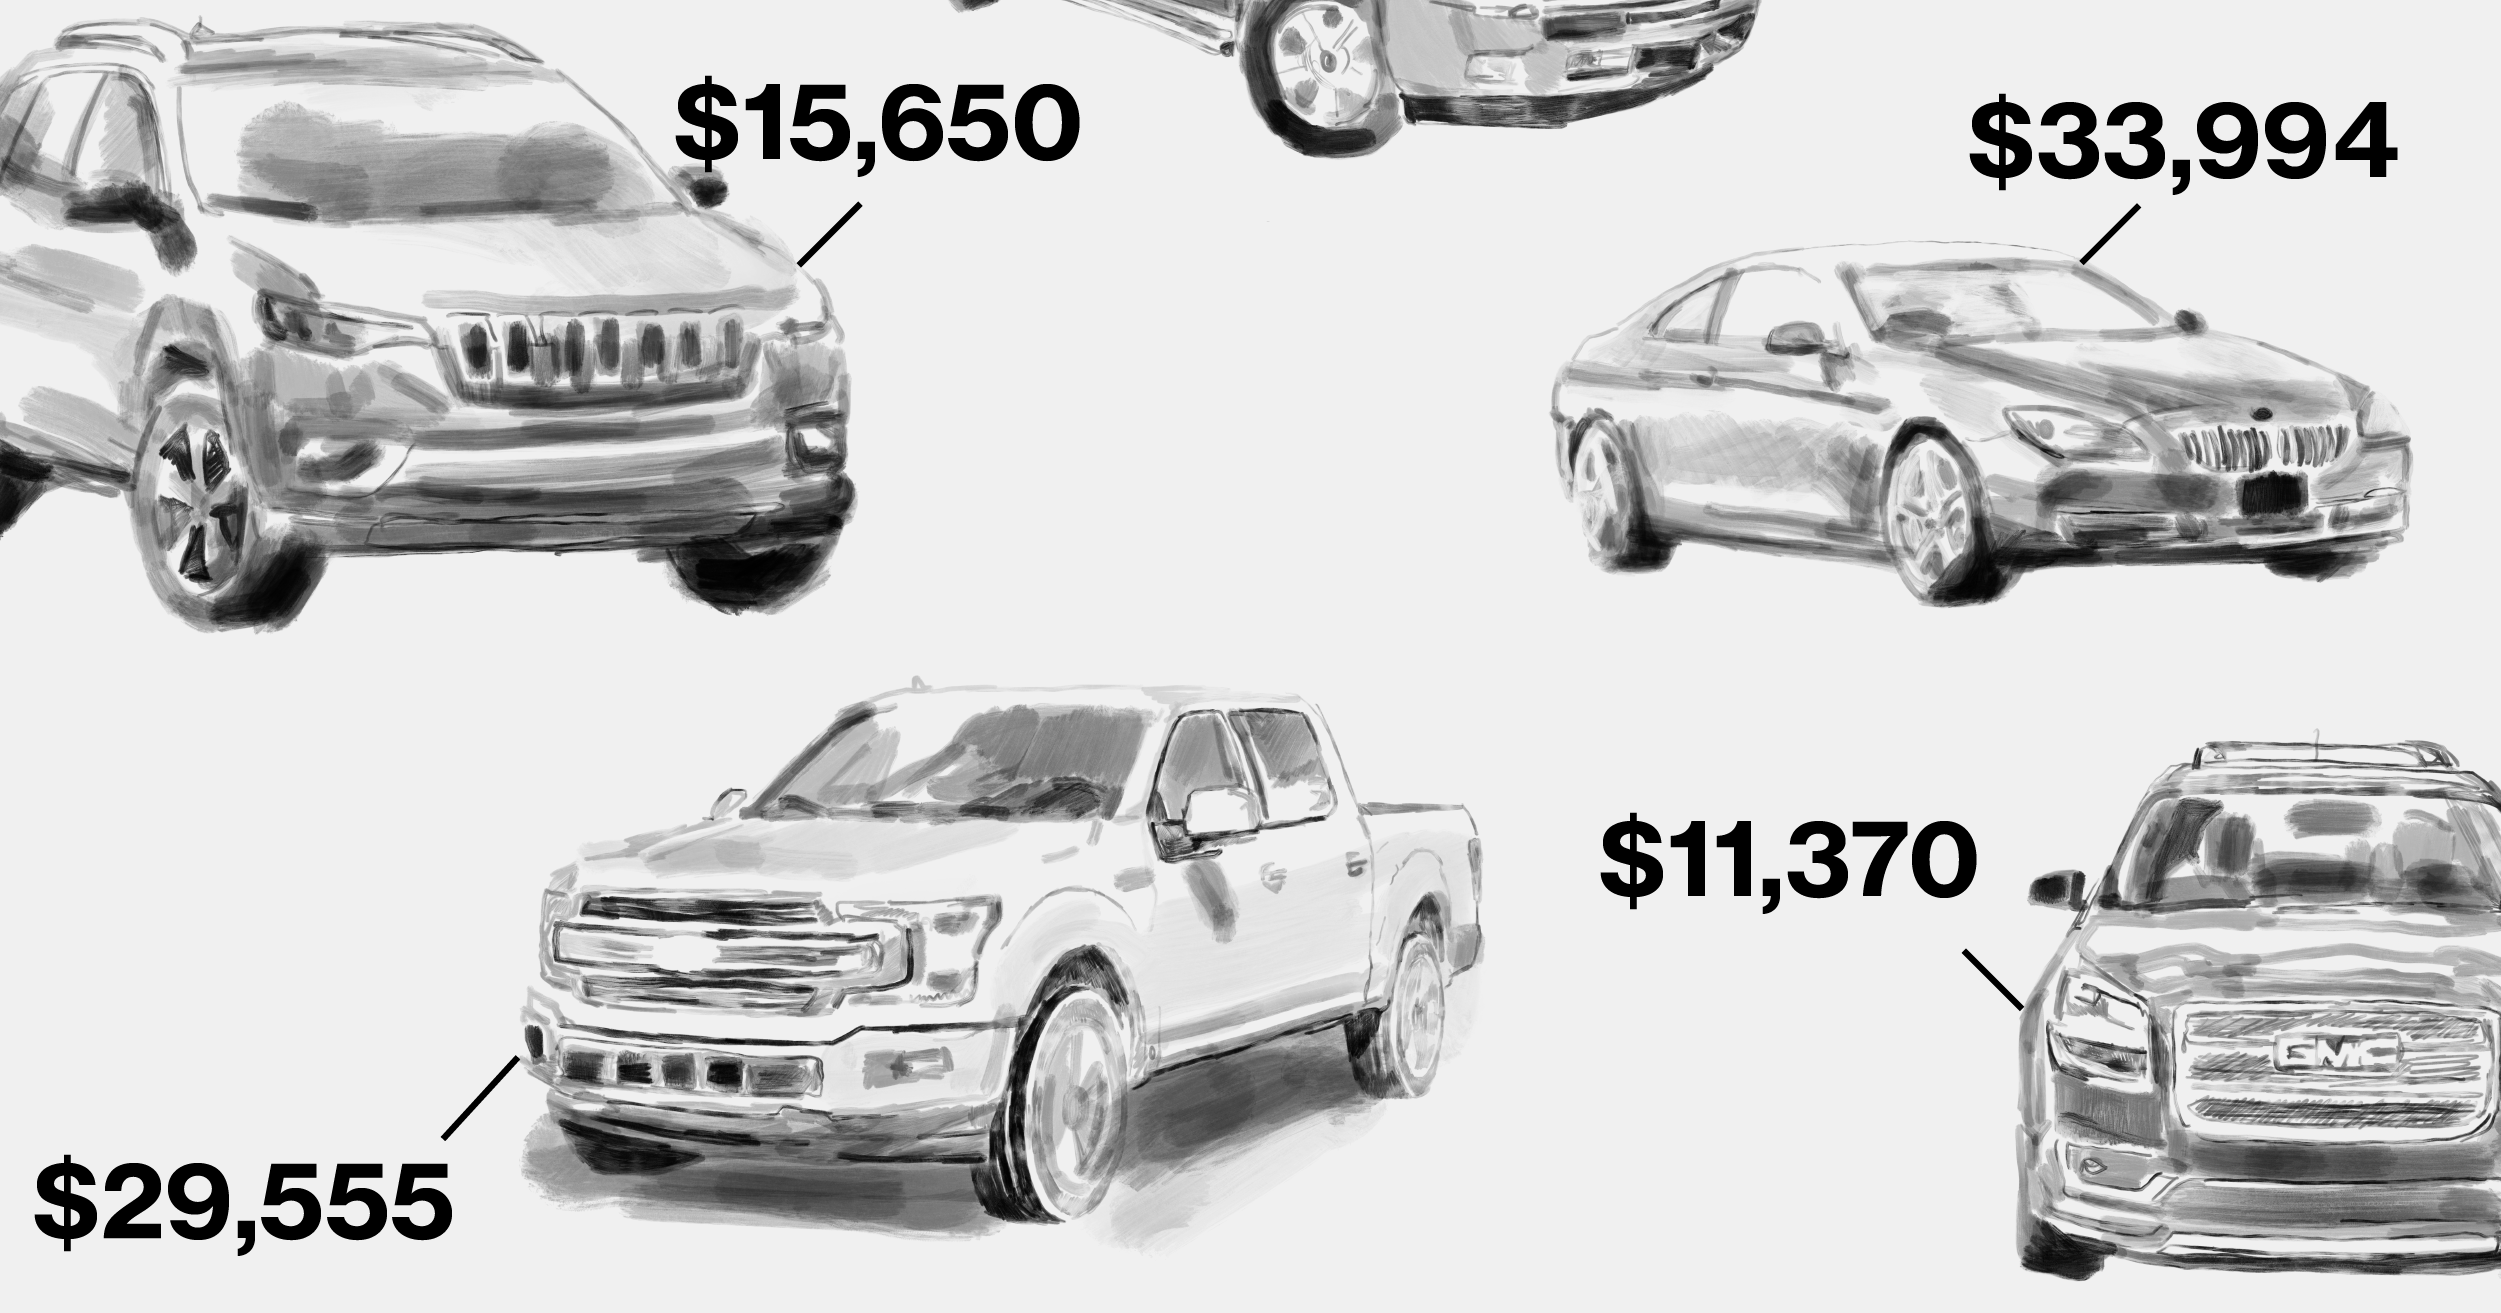 Bad Credit? Car Loans You Can't Afford Make Millions for Wall Street